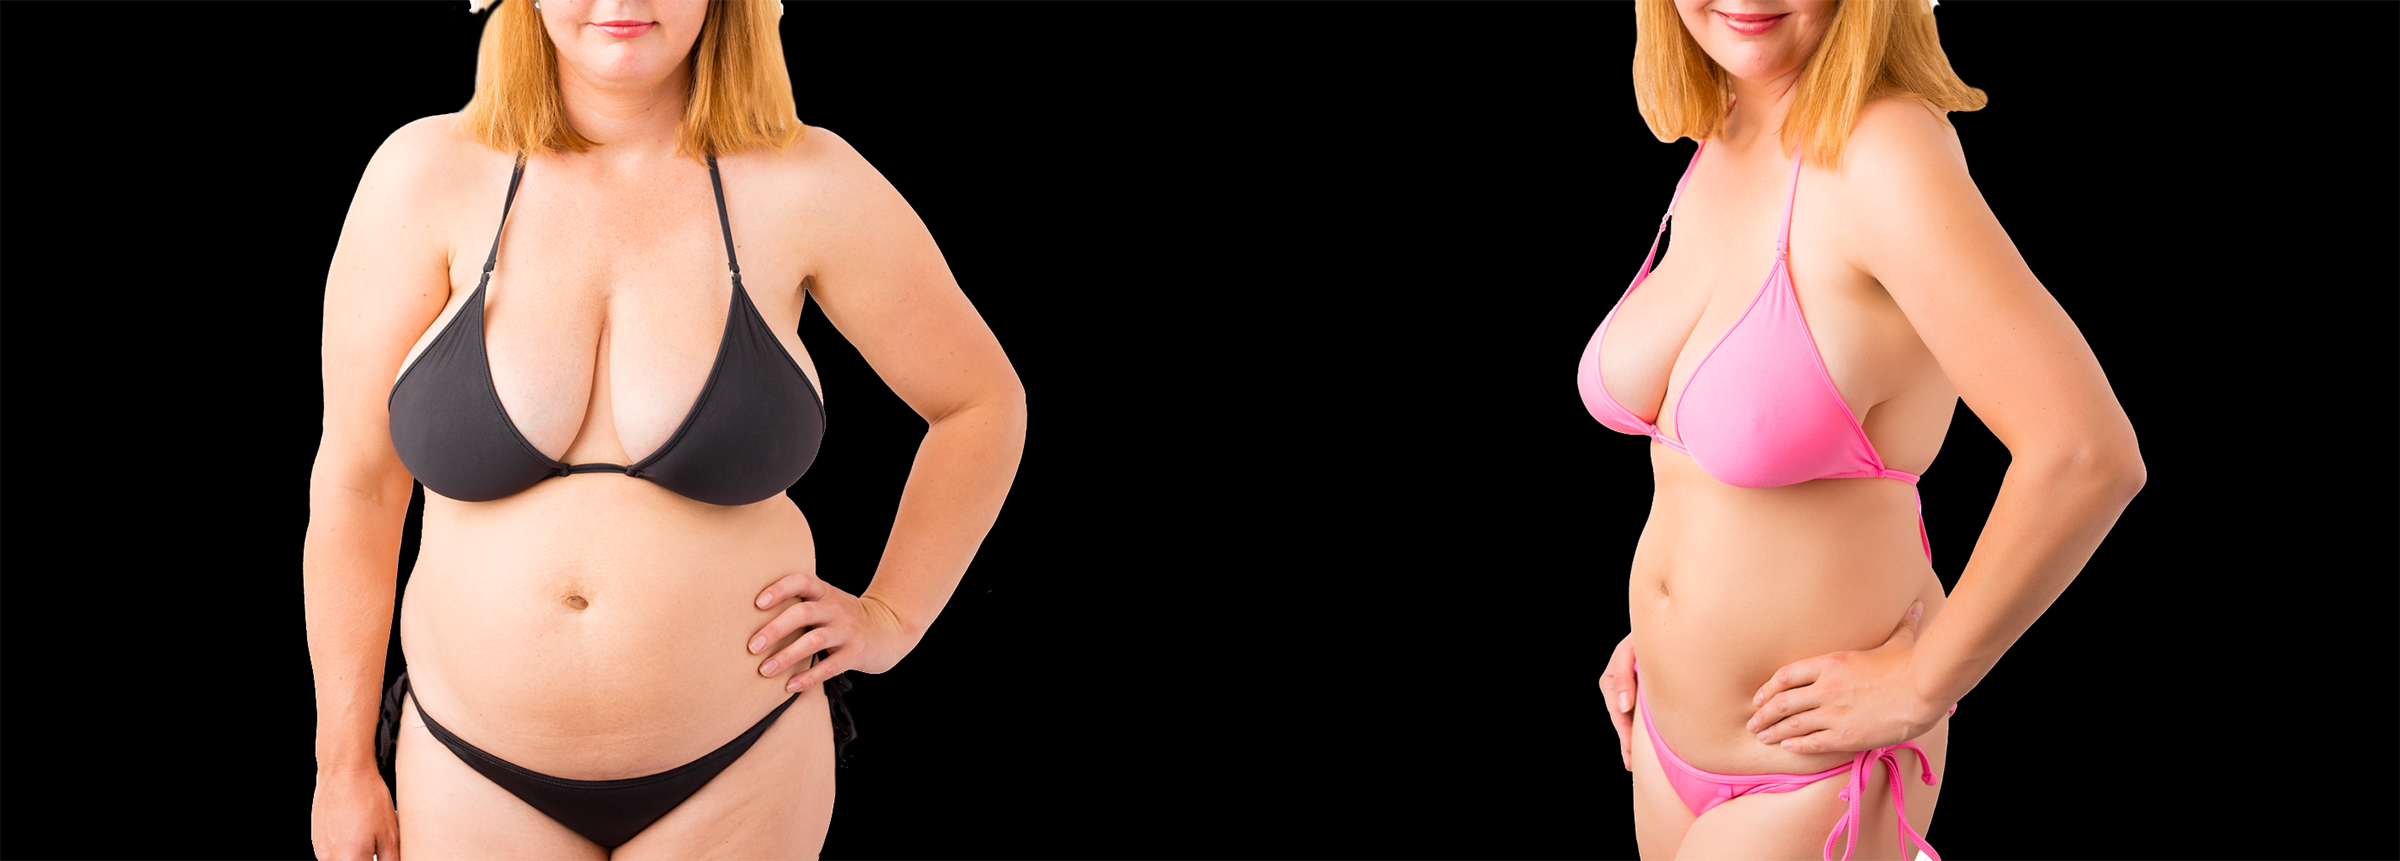 Long Island body reshaping before after